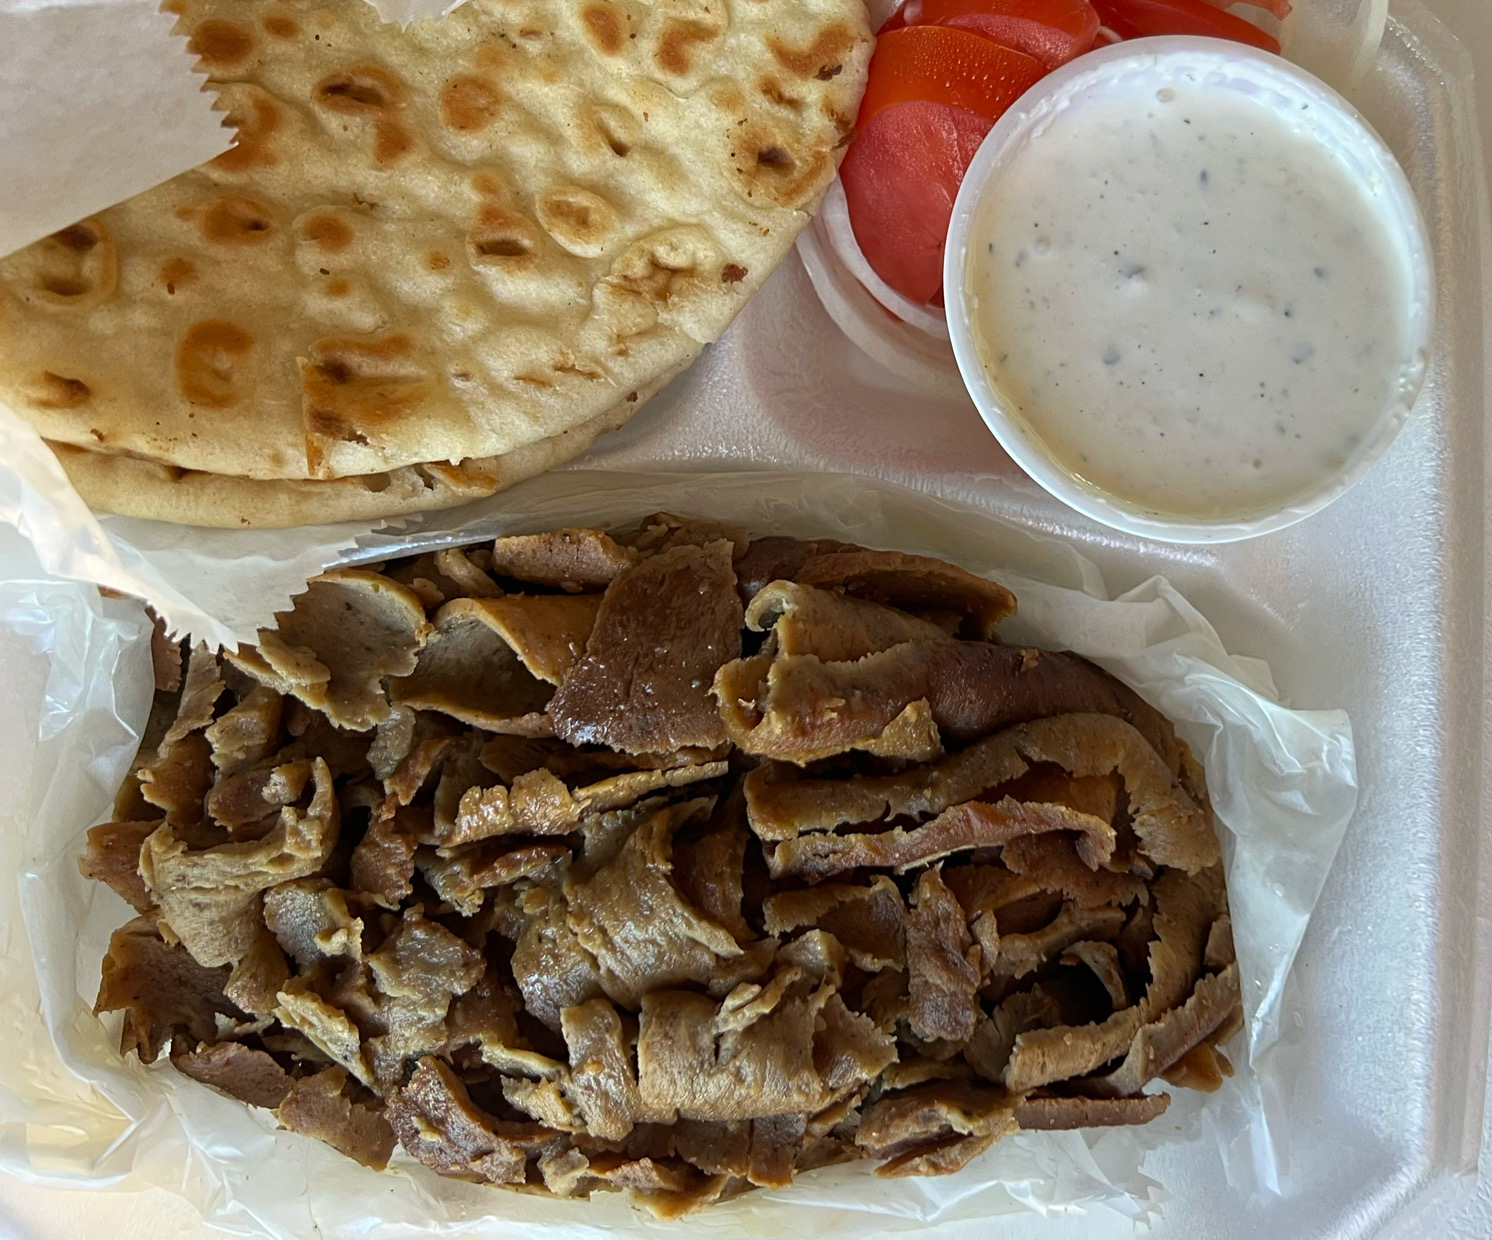 An overhead photo shows a half container of gyro meat with pitas blistered with brown spots, a few slices of tomato, and a few slices of white onion. Photo by Alyssa Buckley.